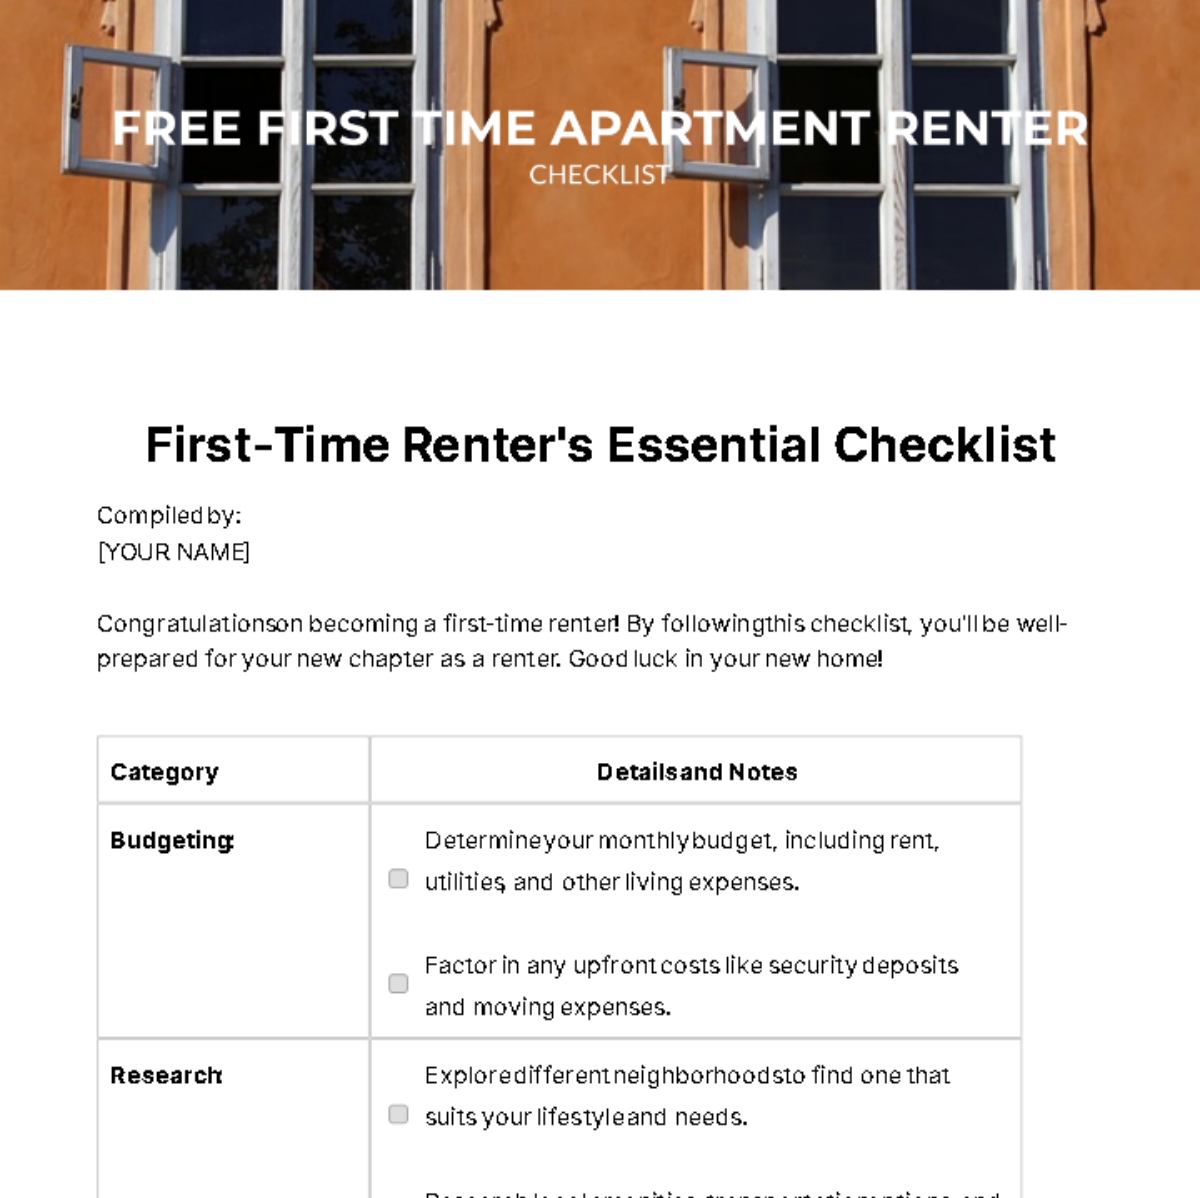 Free First Time Apartment Renter Checklist Template